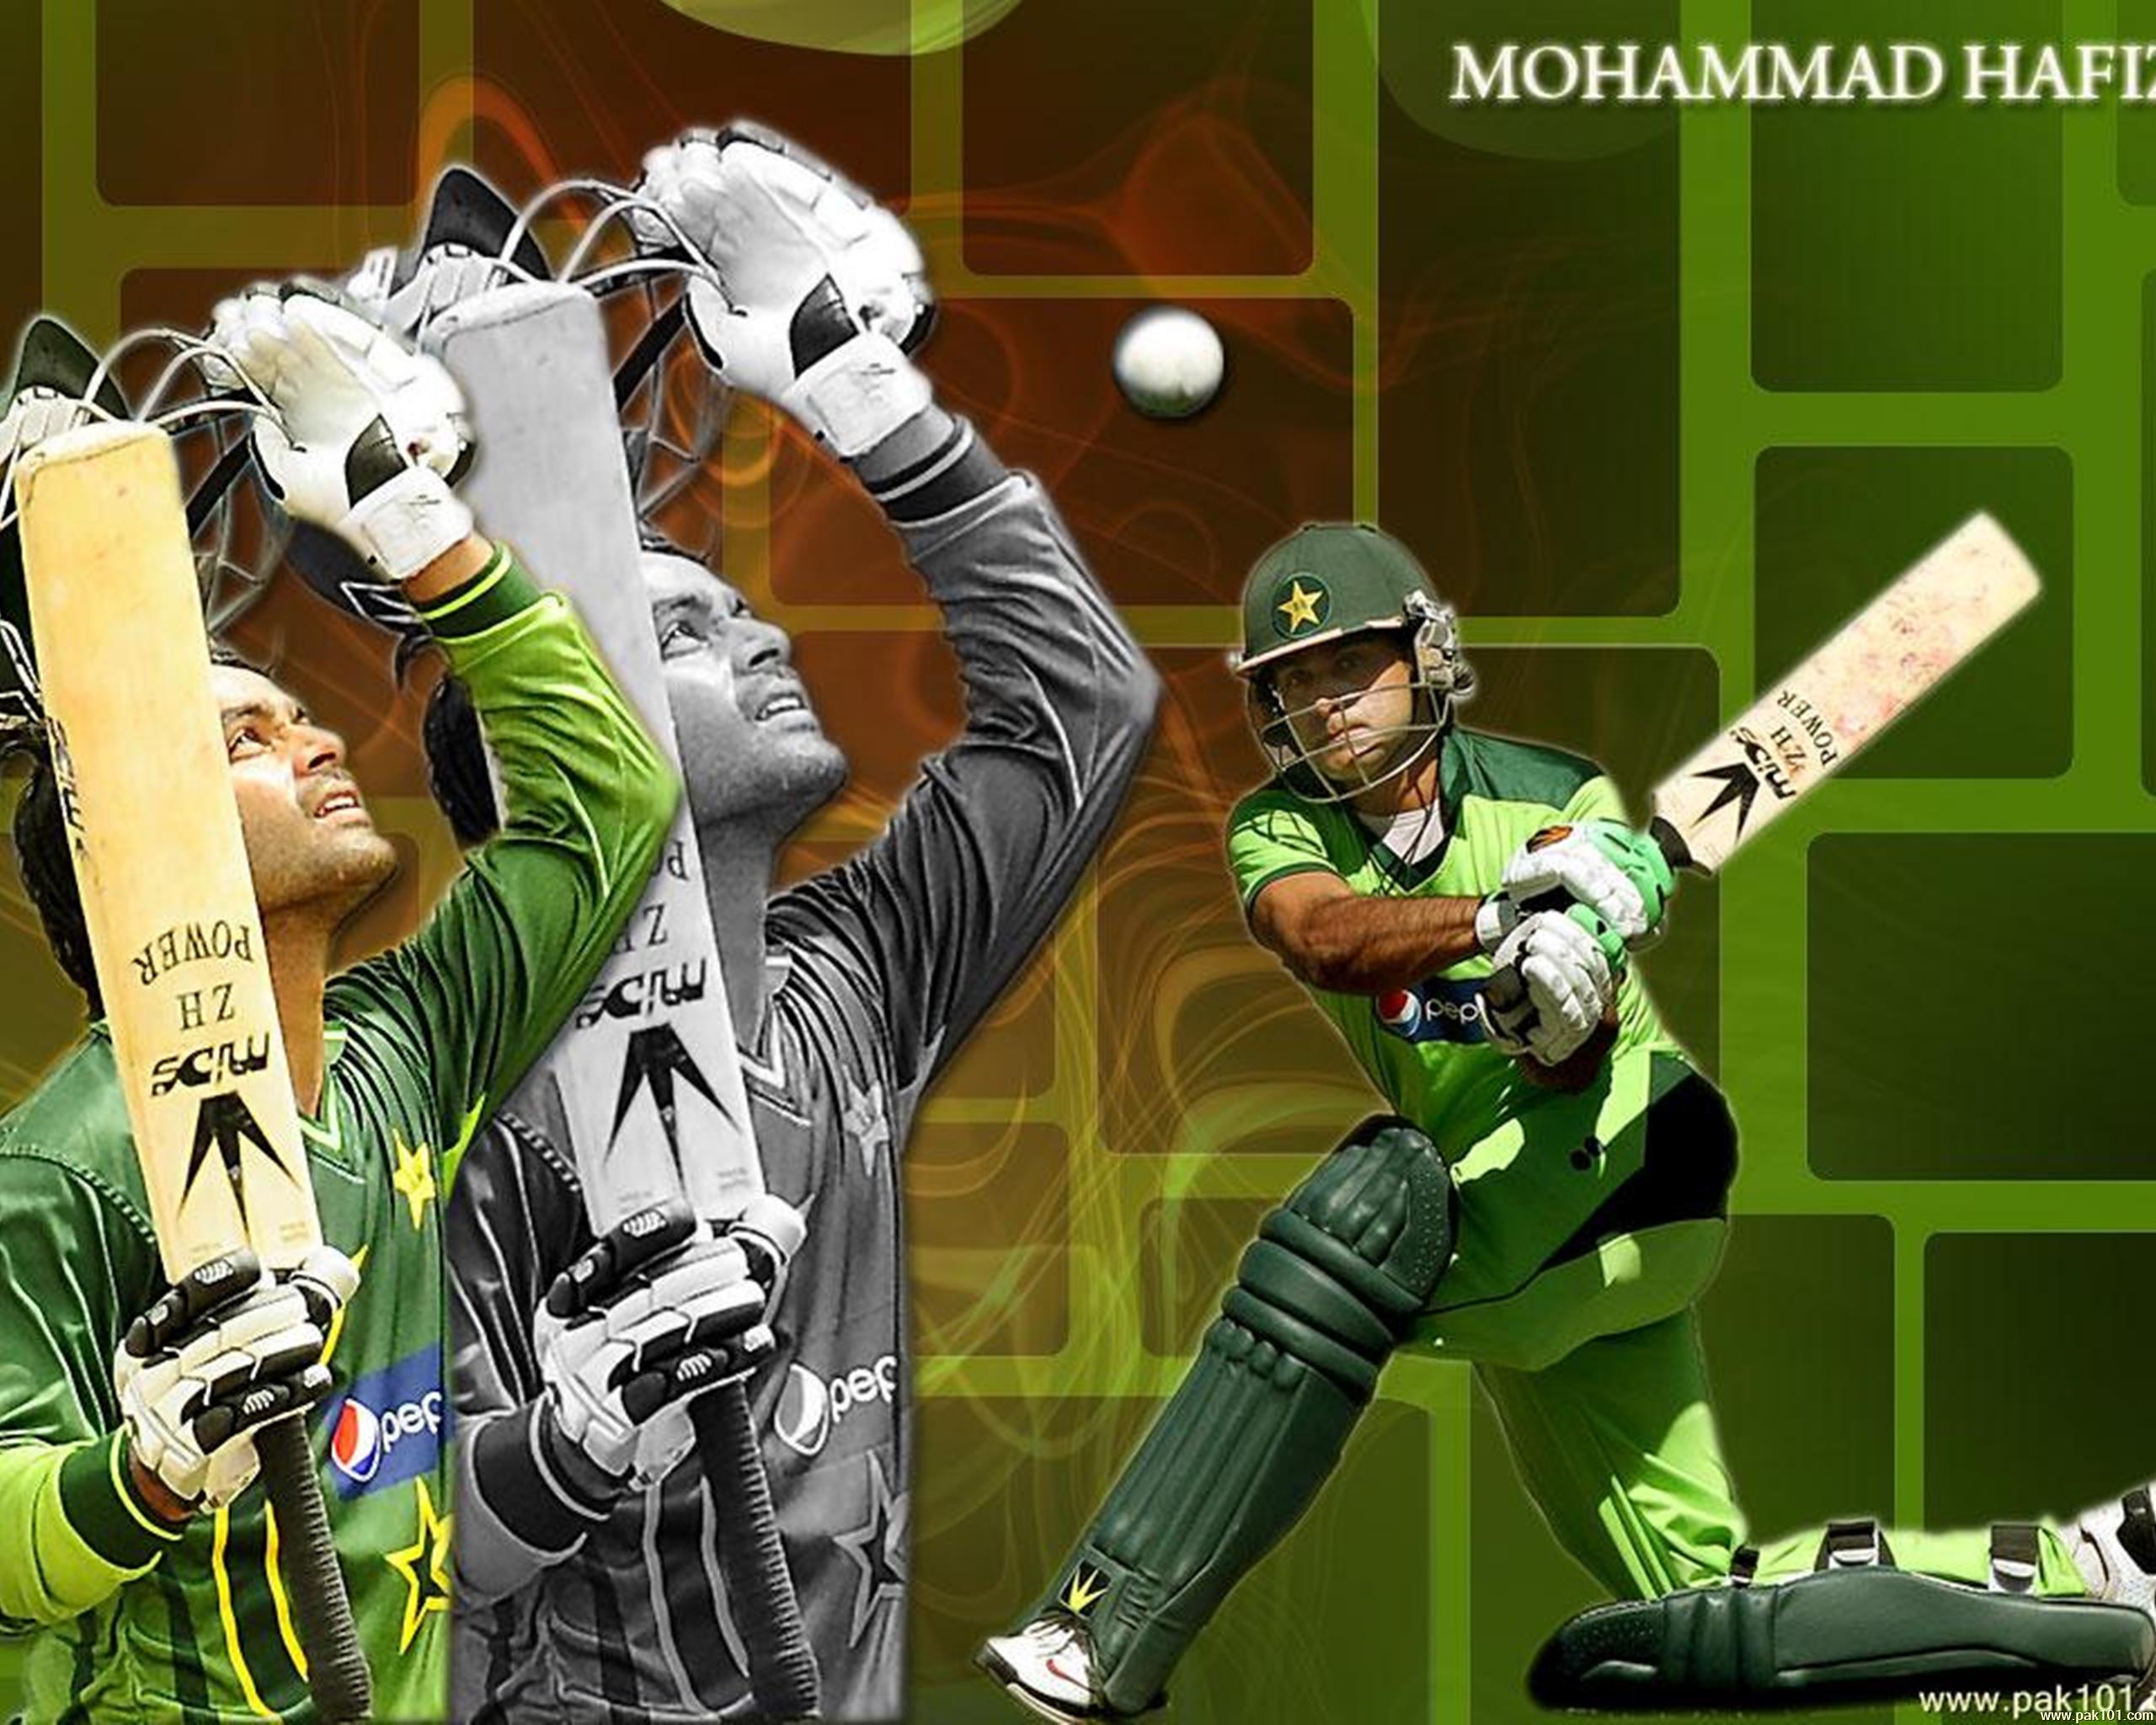 Wallpaper > Cricketers > Mohammad Hafeez > Mohammad Hafeez high quality! Free download 1024x768